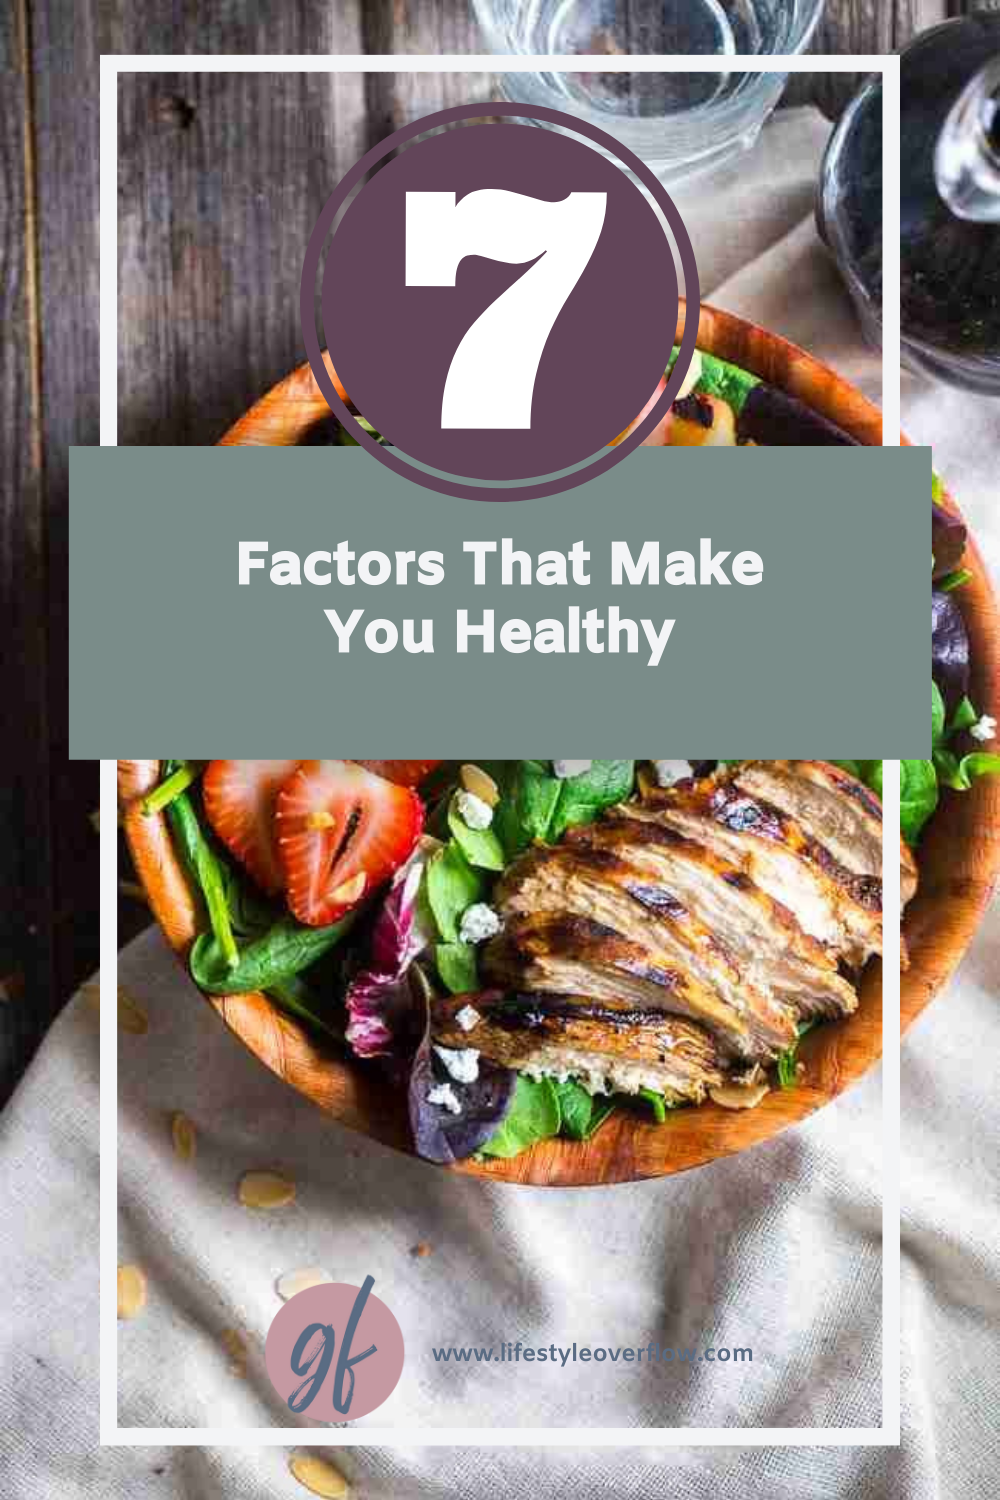 graphic of a dish with grilled chicken, strawberries and lettuce with text: 7 factors that make you healthy. lifestyleoverflow.com